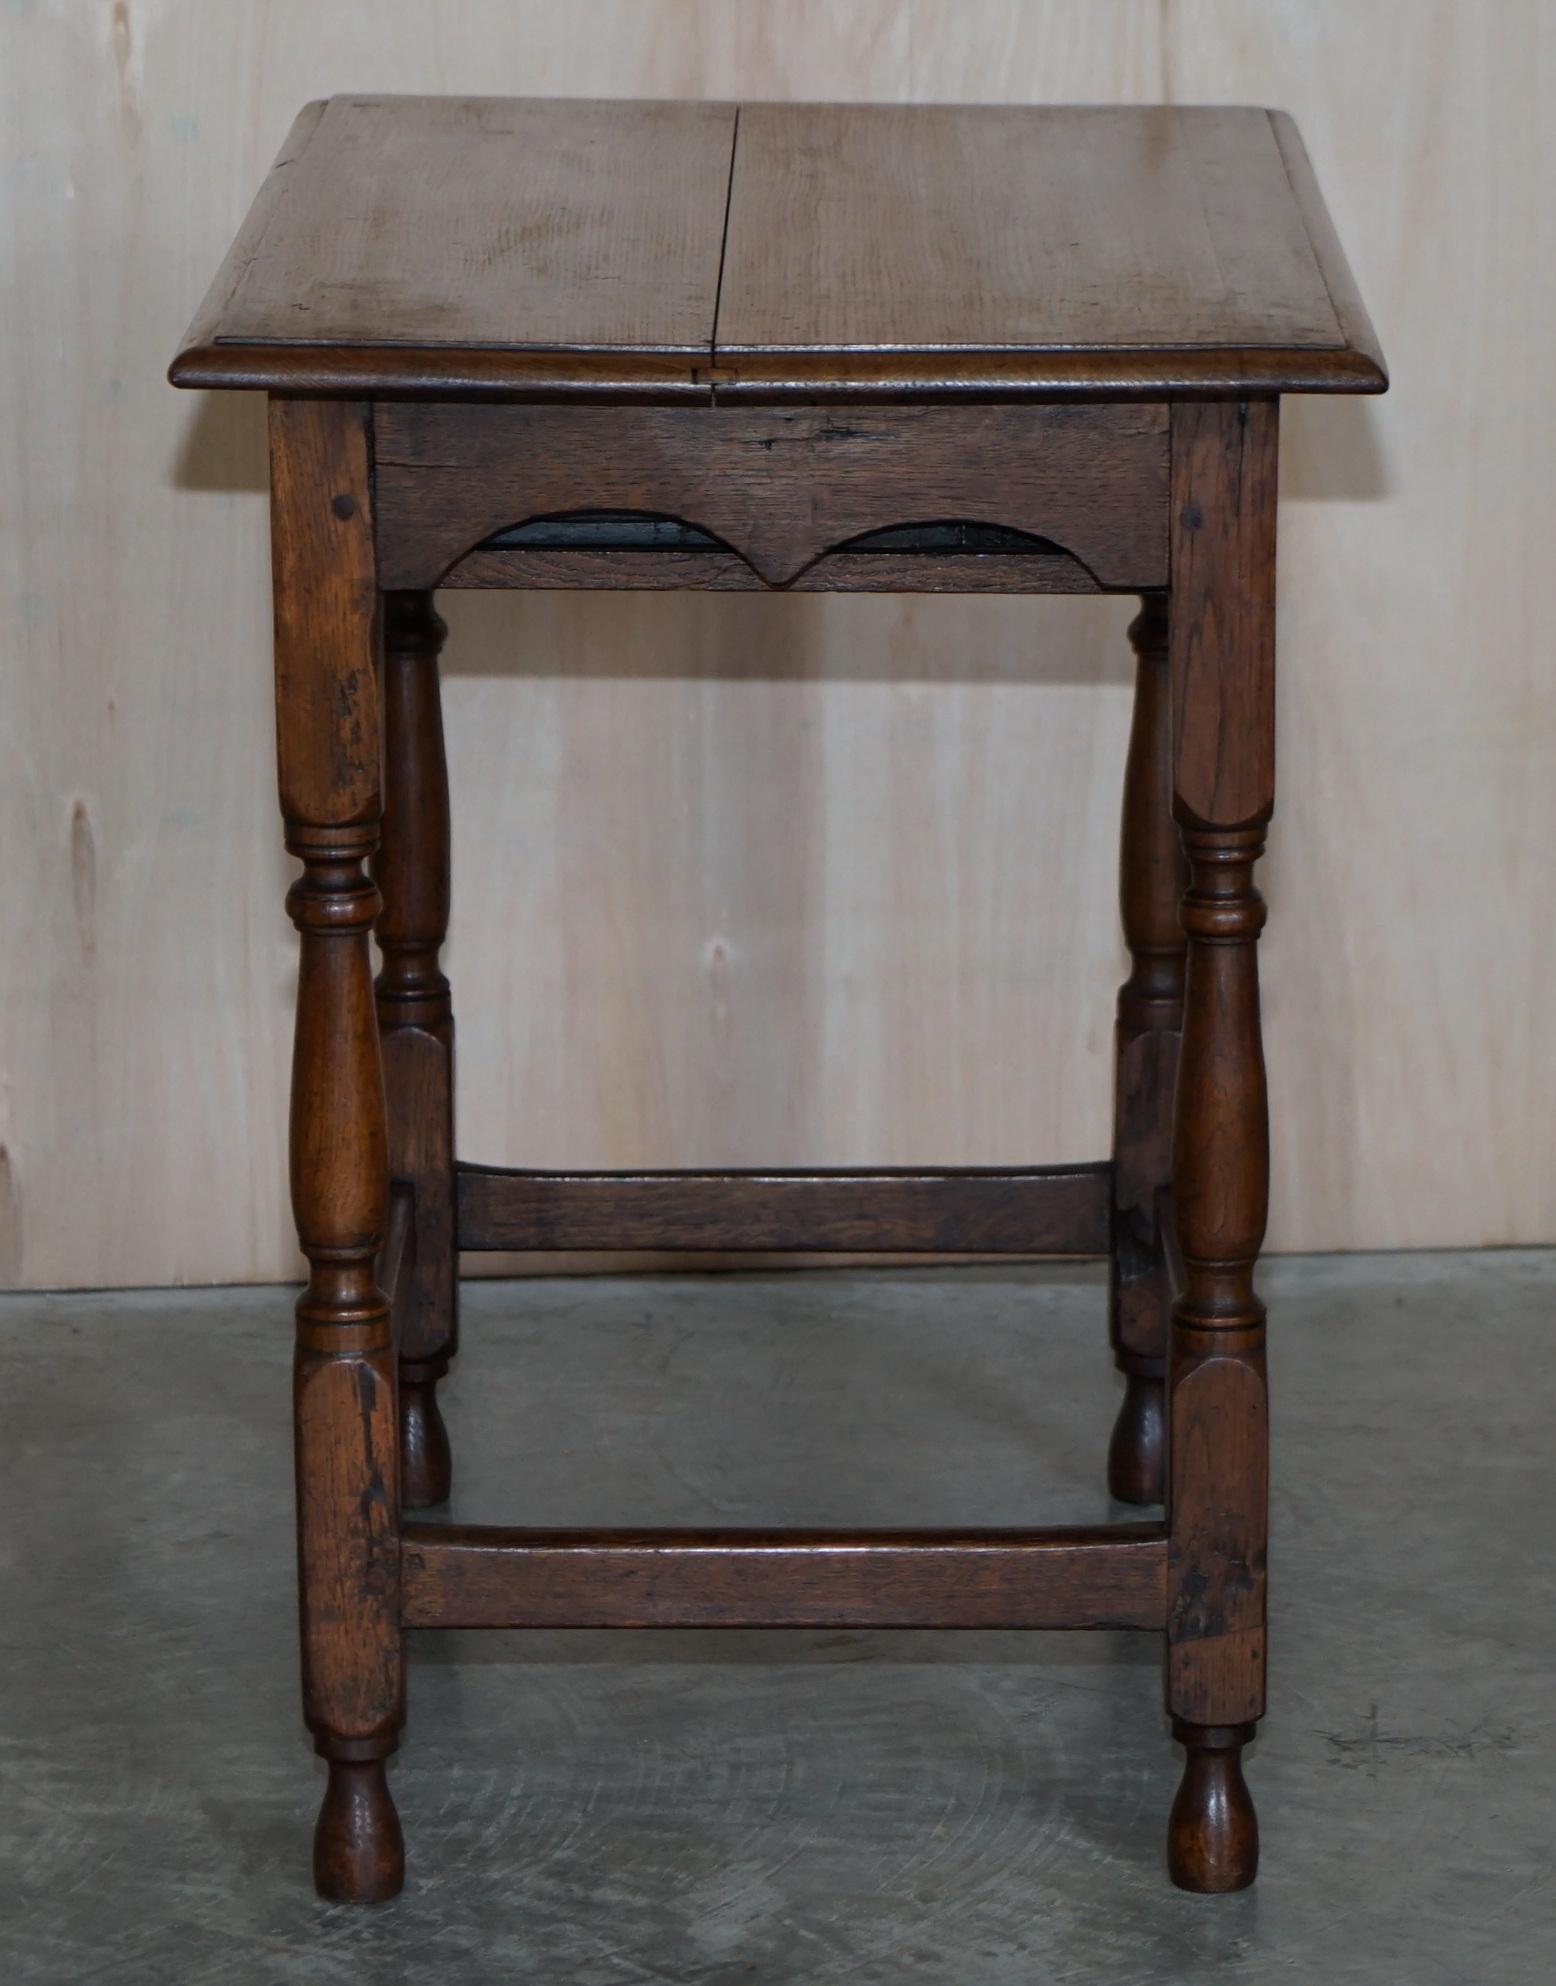 Antique circa 1700 English Oak Jointed Lowboy Side Table with Single Drawer For Sale 8